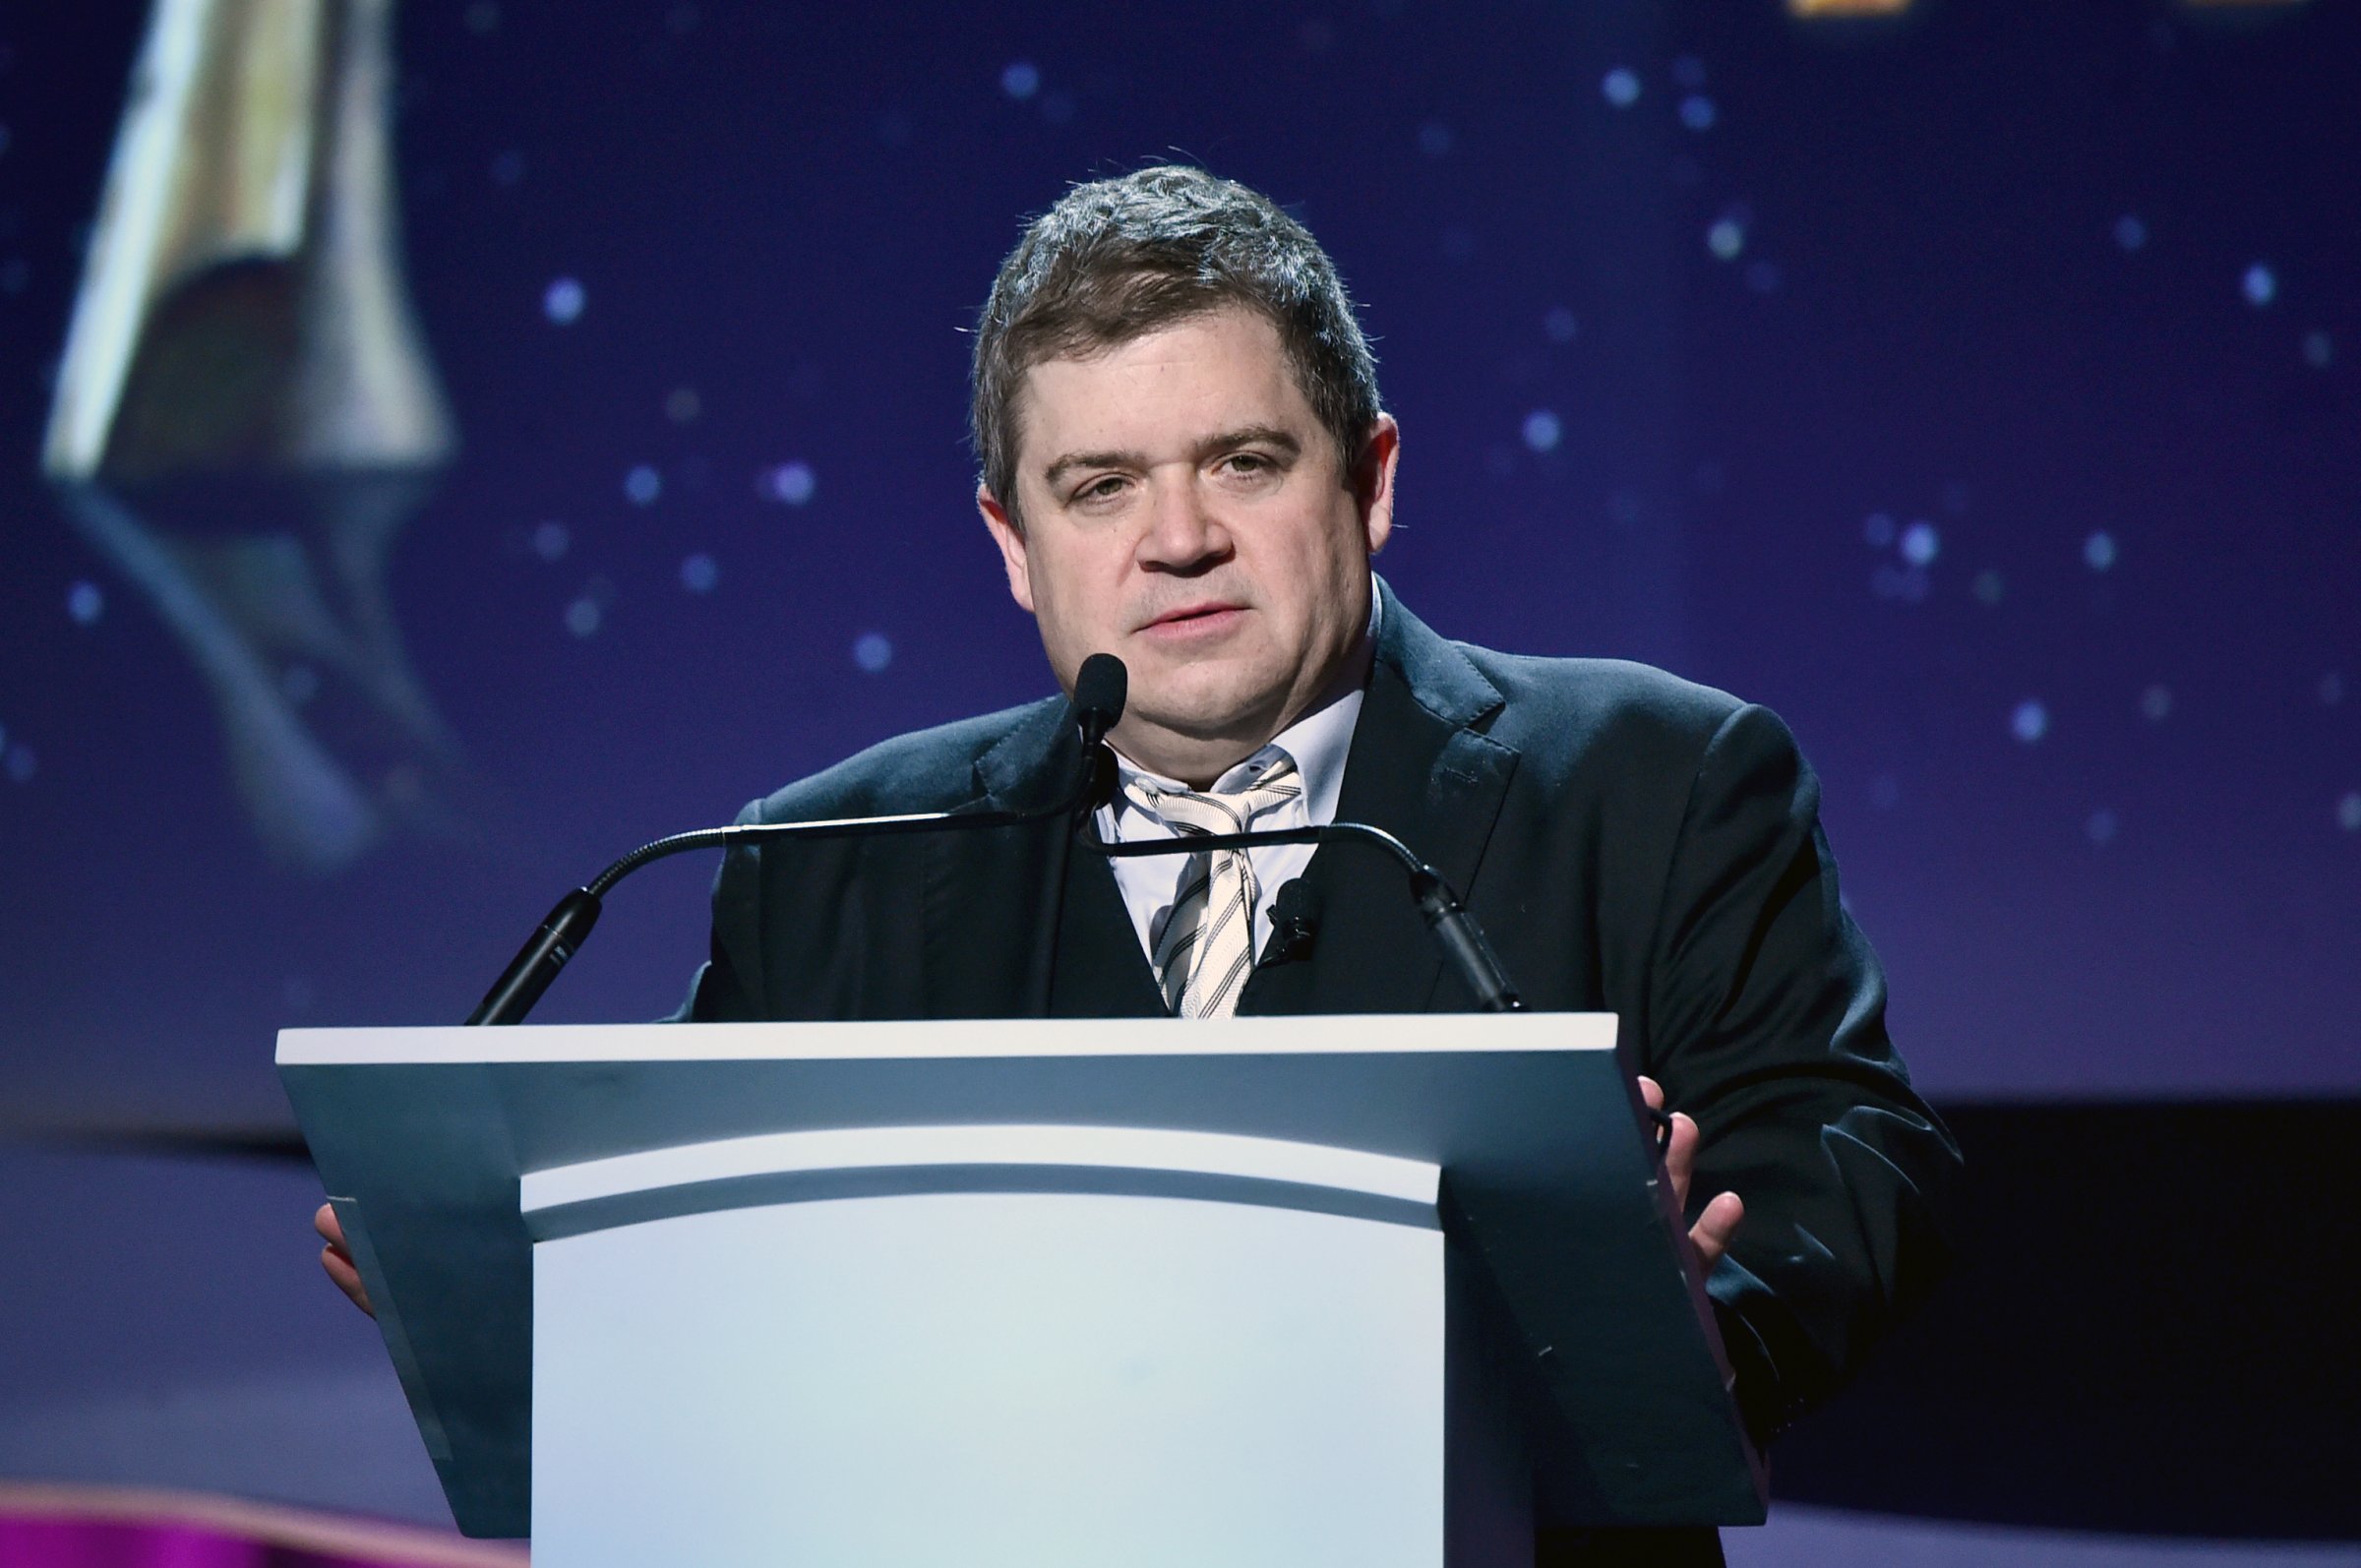 Host Patton Oswalt speaks onstage during the 2016 Writers Guild Awards at the Hyatt Regency Century Plaza on February 13, 2016 in Los Angeles, California.